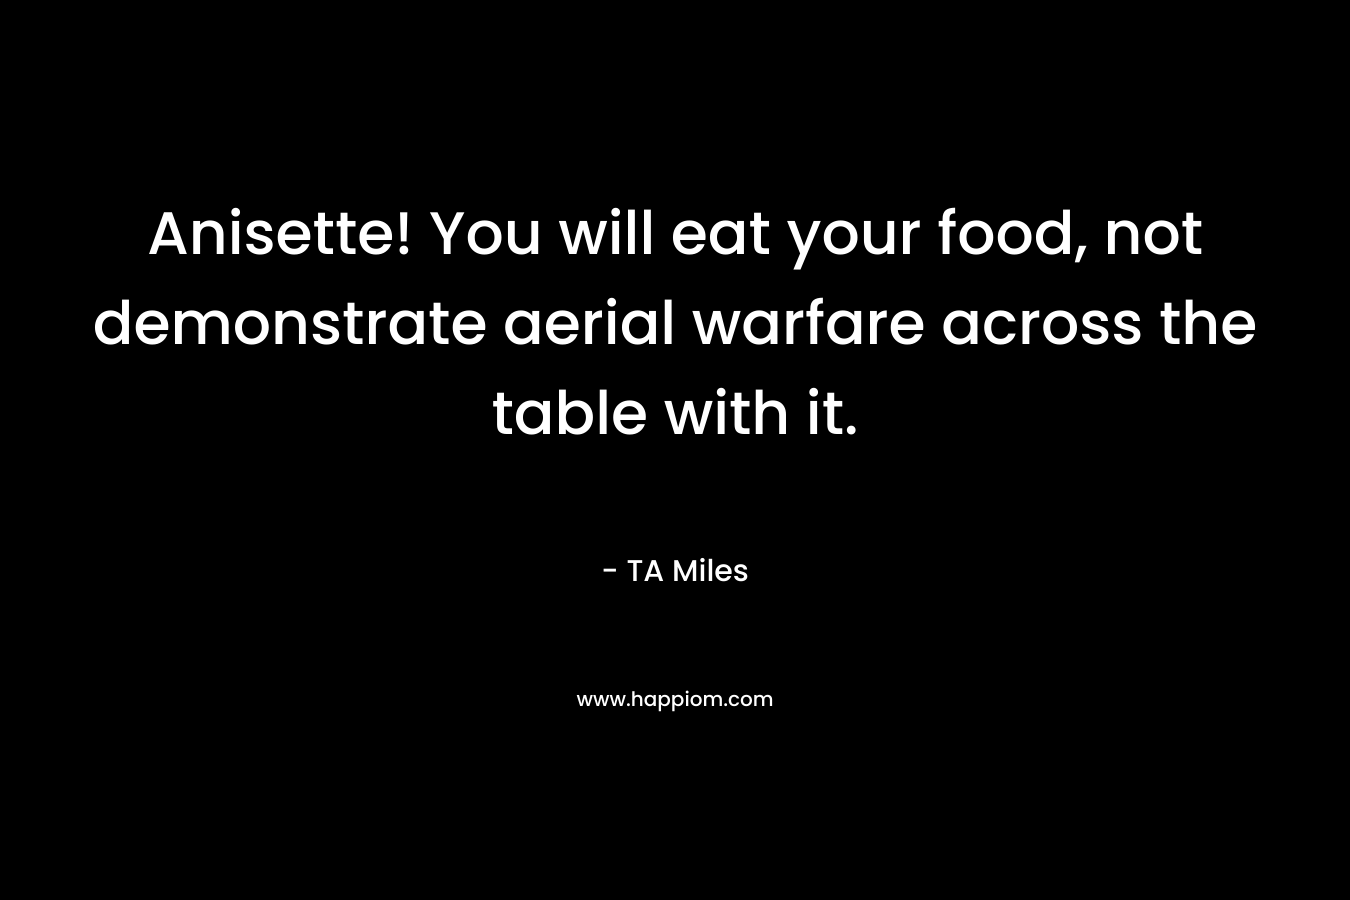 Anisette! You will eat your food, not demonstrate aerial warfare across the table with it.